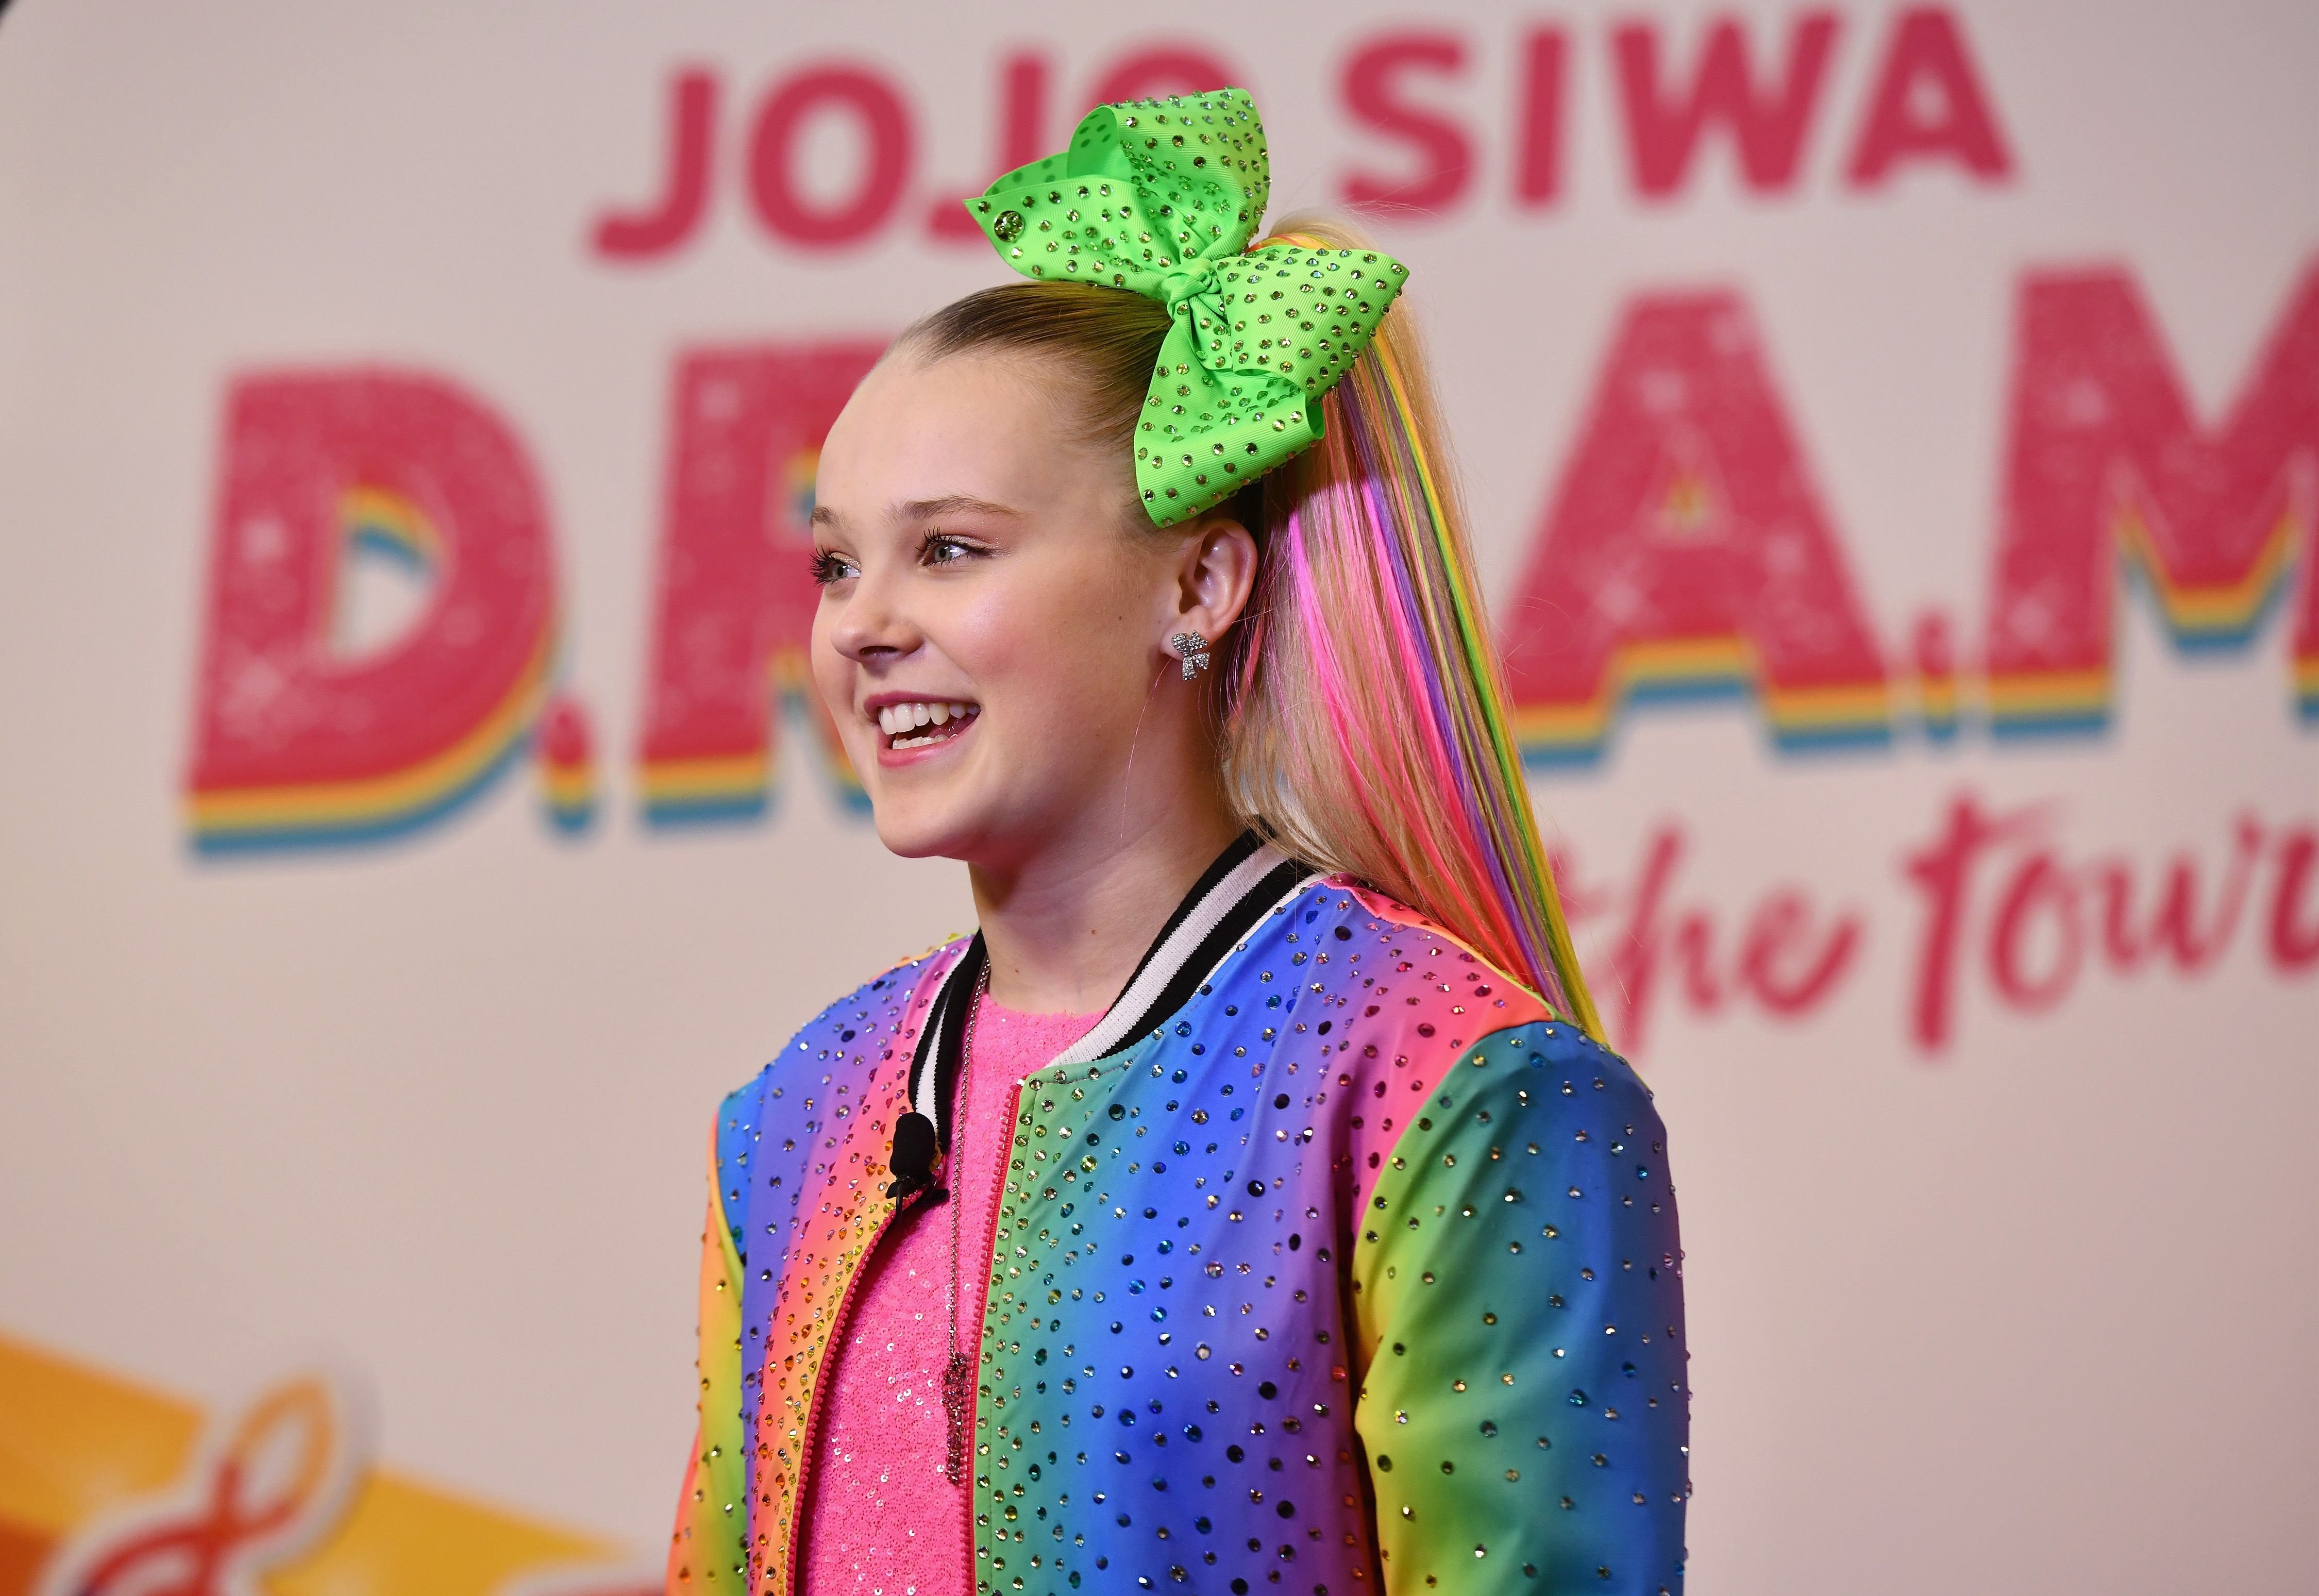 JoJo Siwa announces her upcoming EP and D.R.E.A.M. Tour at Sugar Factory on November 7, 2018, in New York | Photo: Noam Galai/Getty Images